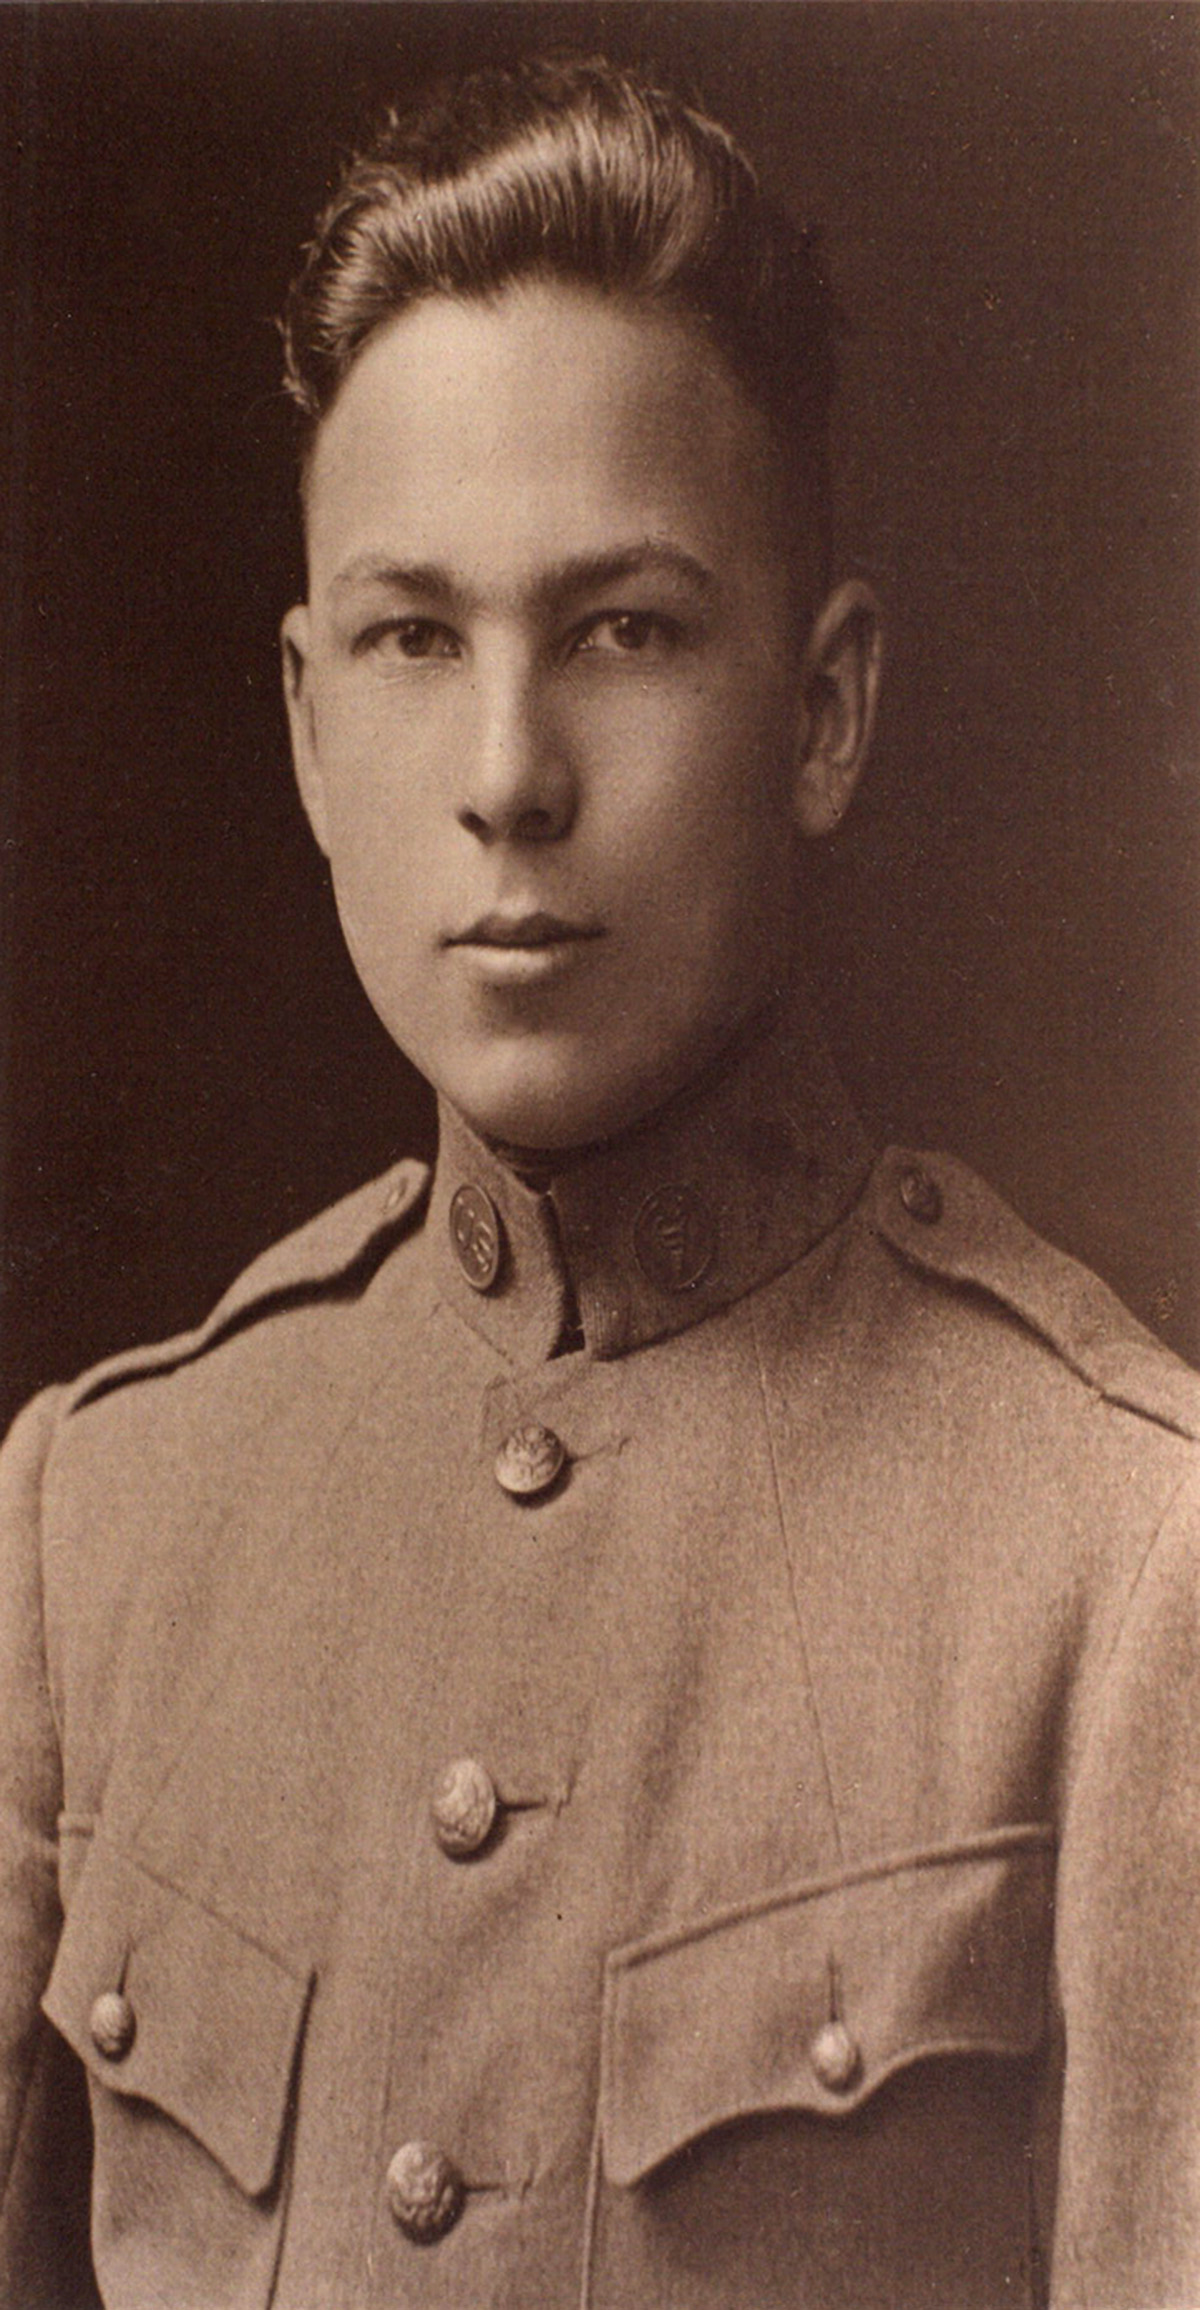 Frank Buckles joins the United States Army 1917